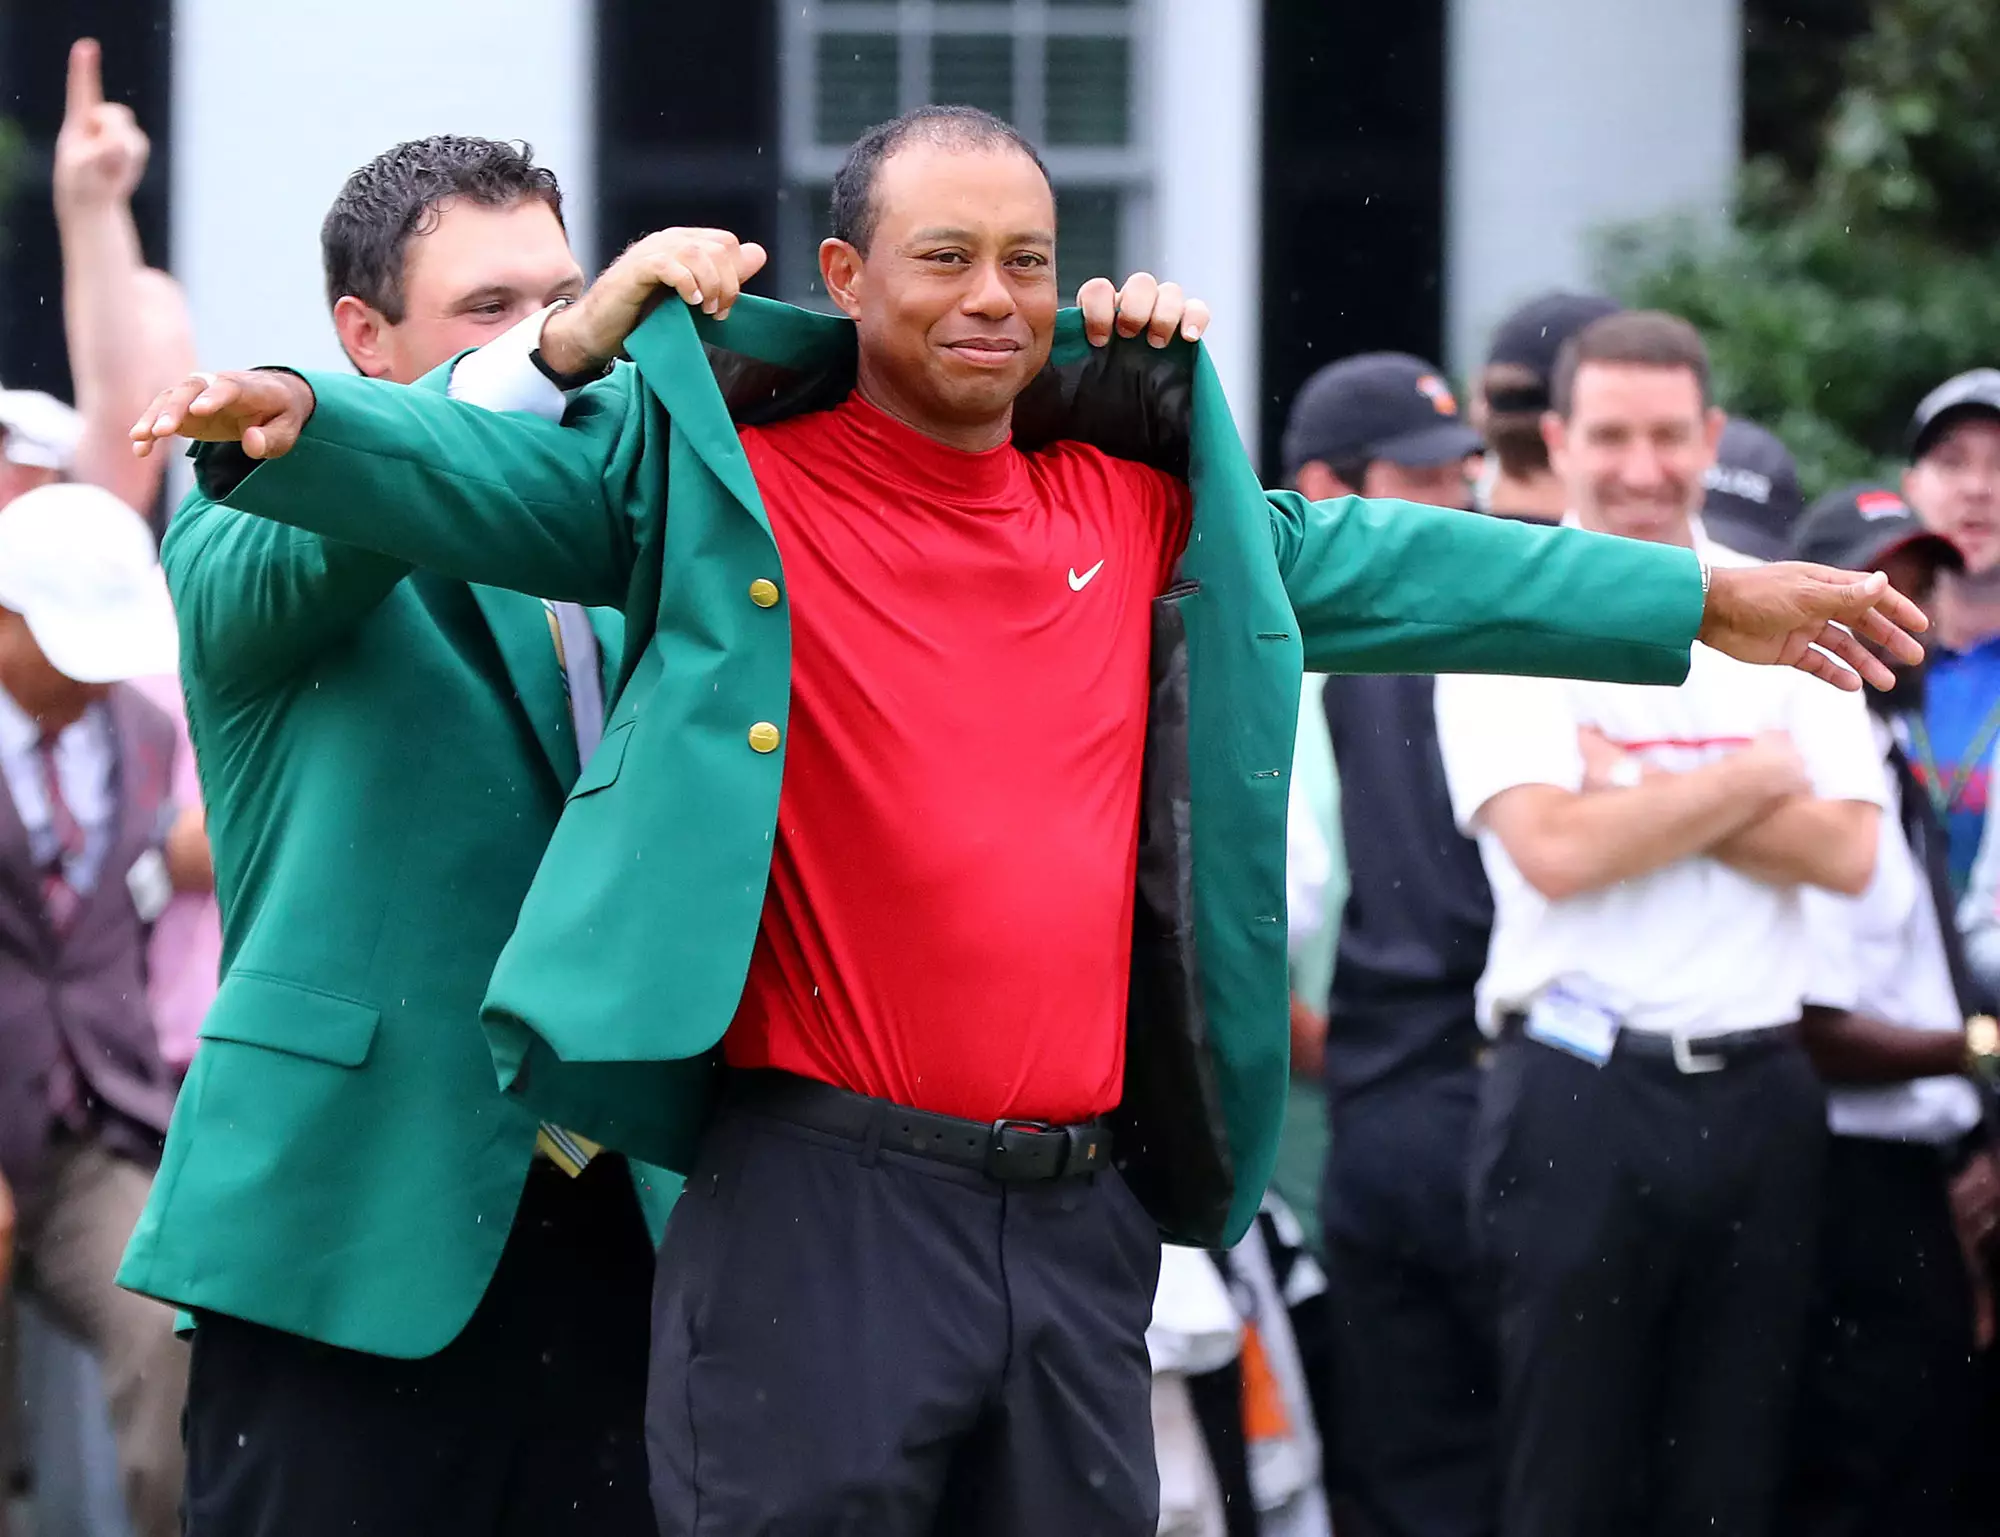 Woods collects his green jacket from Patrick Reed. Image: PA Images